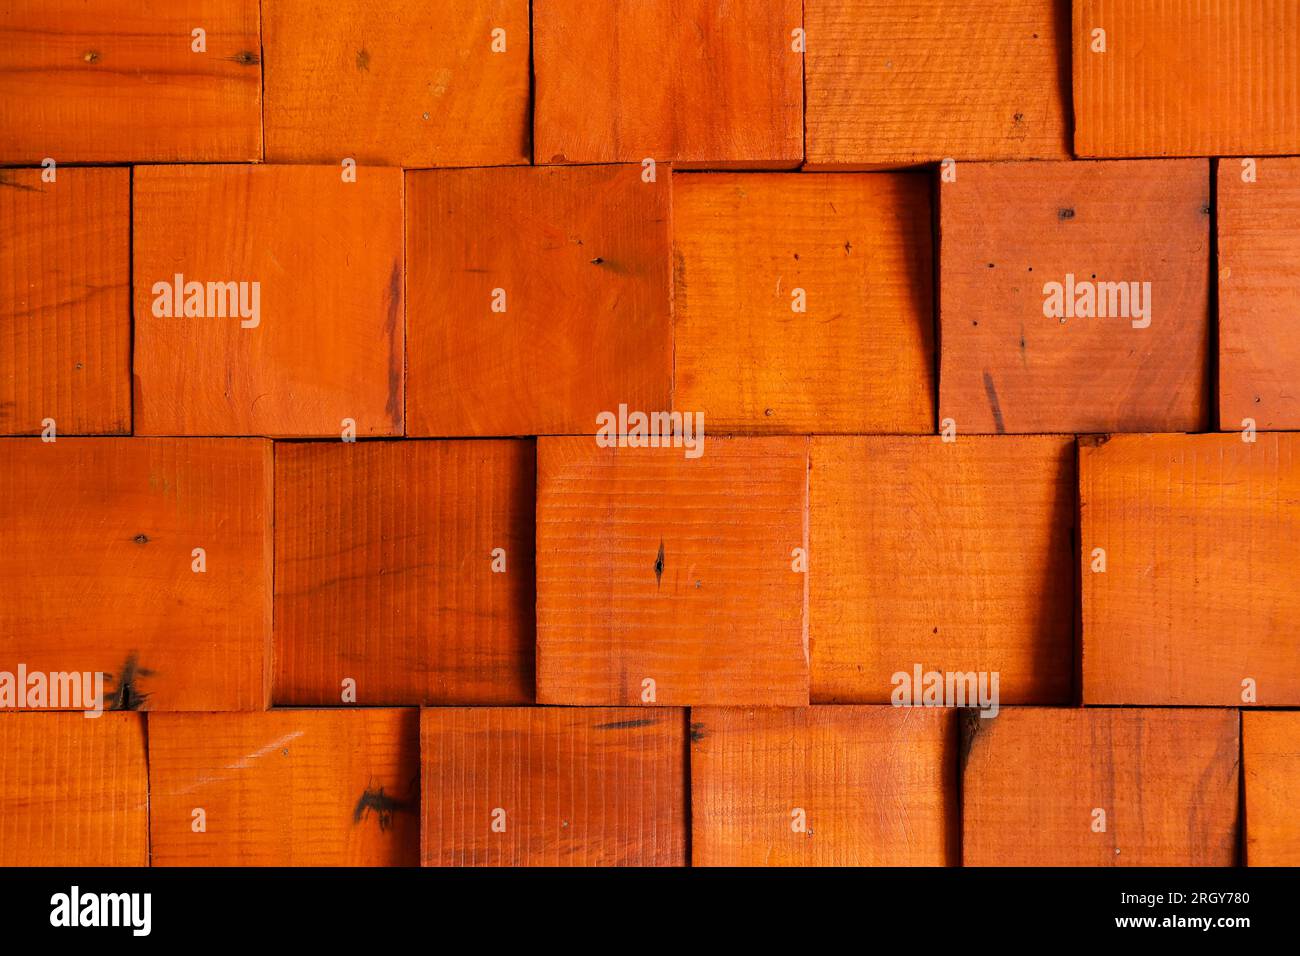 wall texture with wooden bricks, abstract scene background in warm tone and light and shadow effect Stock Photo